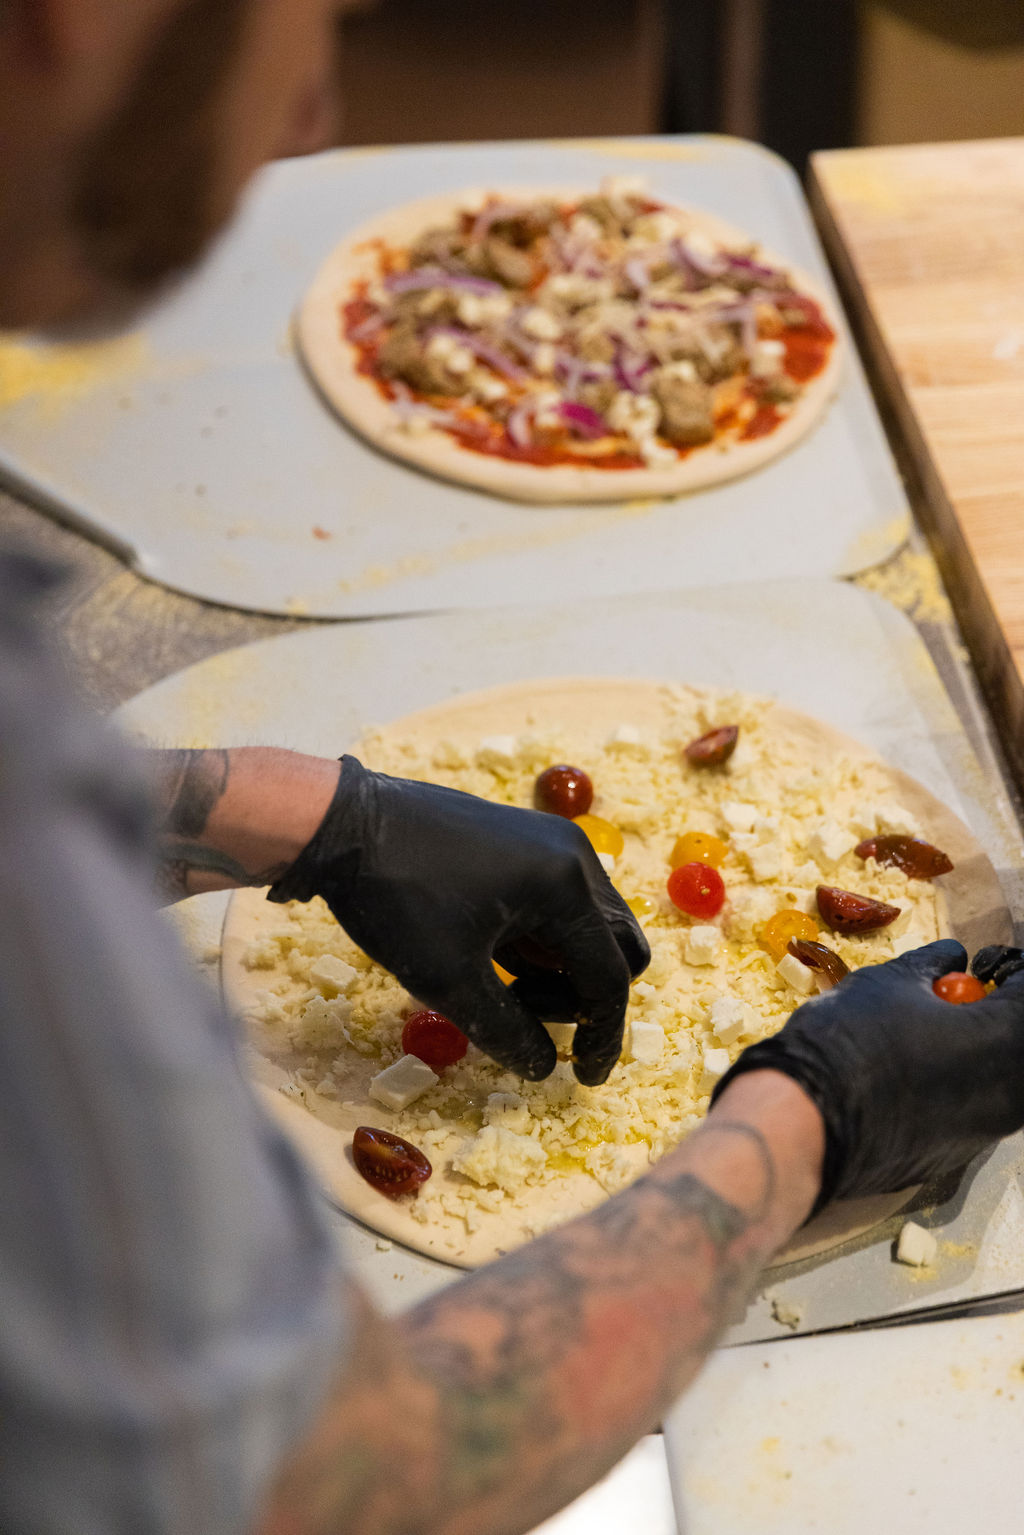 gourmet pizza made with care in an open kitchen